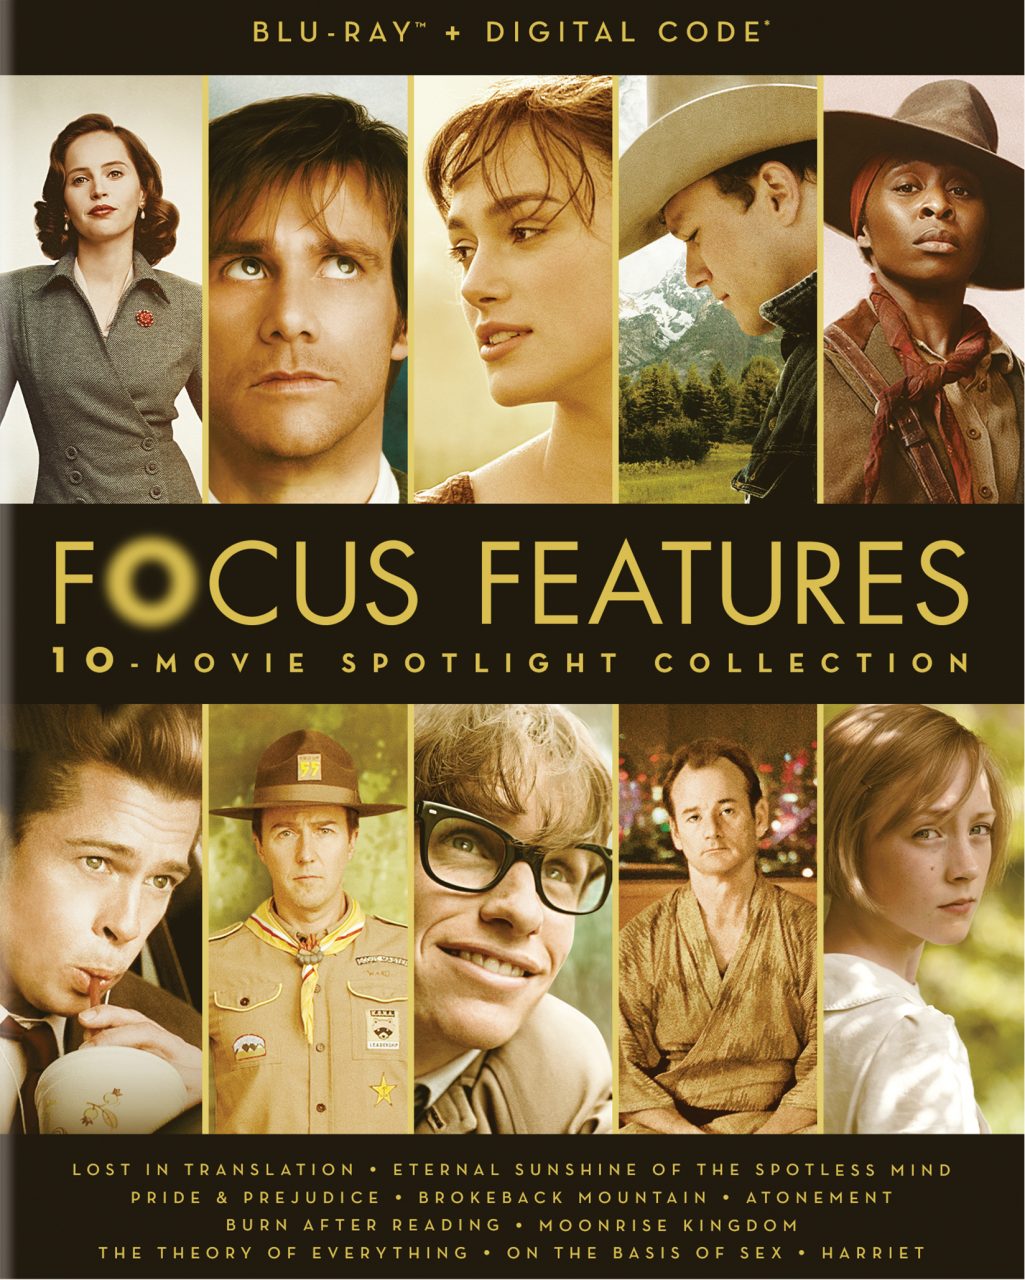 Focus Features 10-Movie Spotlight Collection Blu-Ray Combo Pack cover (Universal Pictures Home Entertainment)